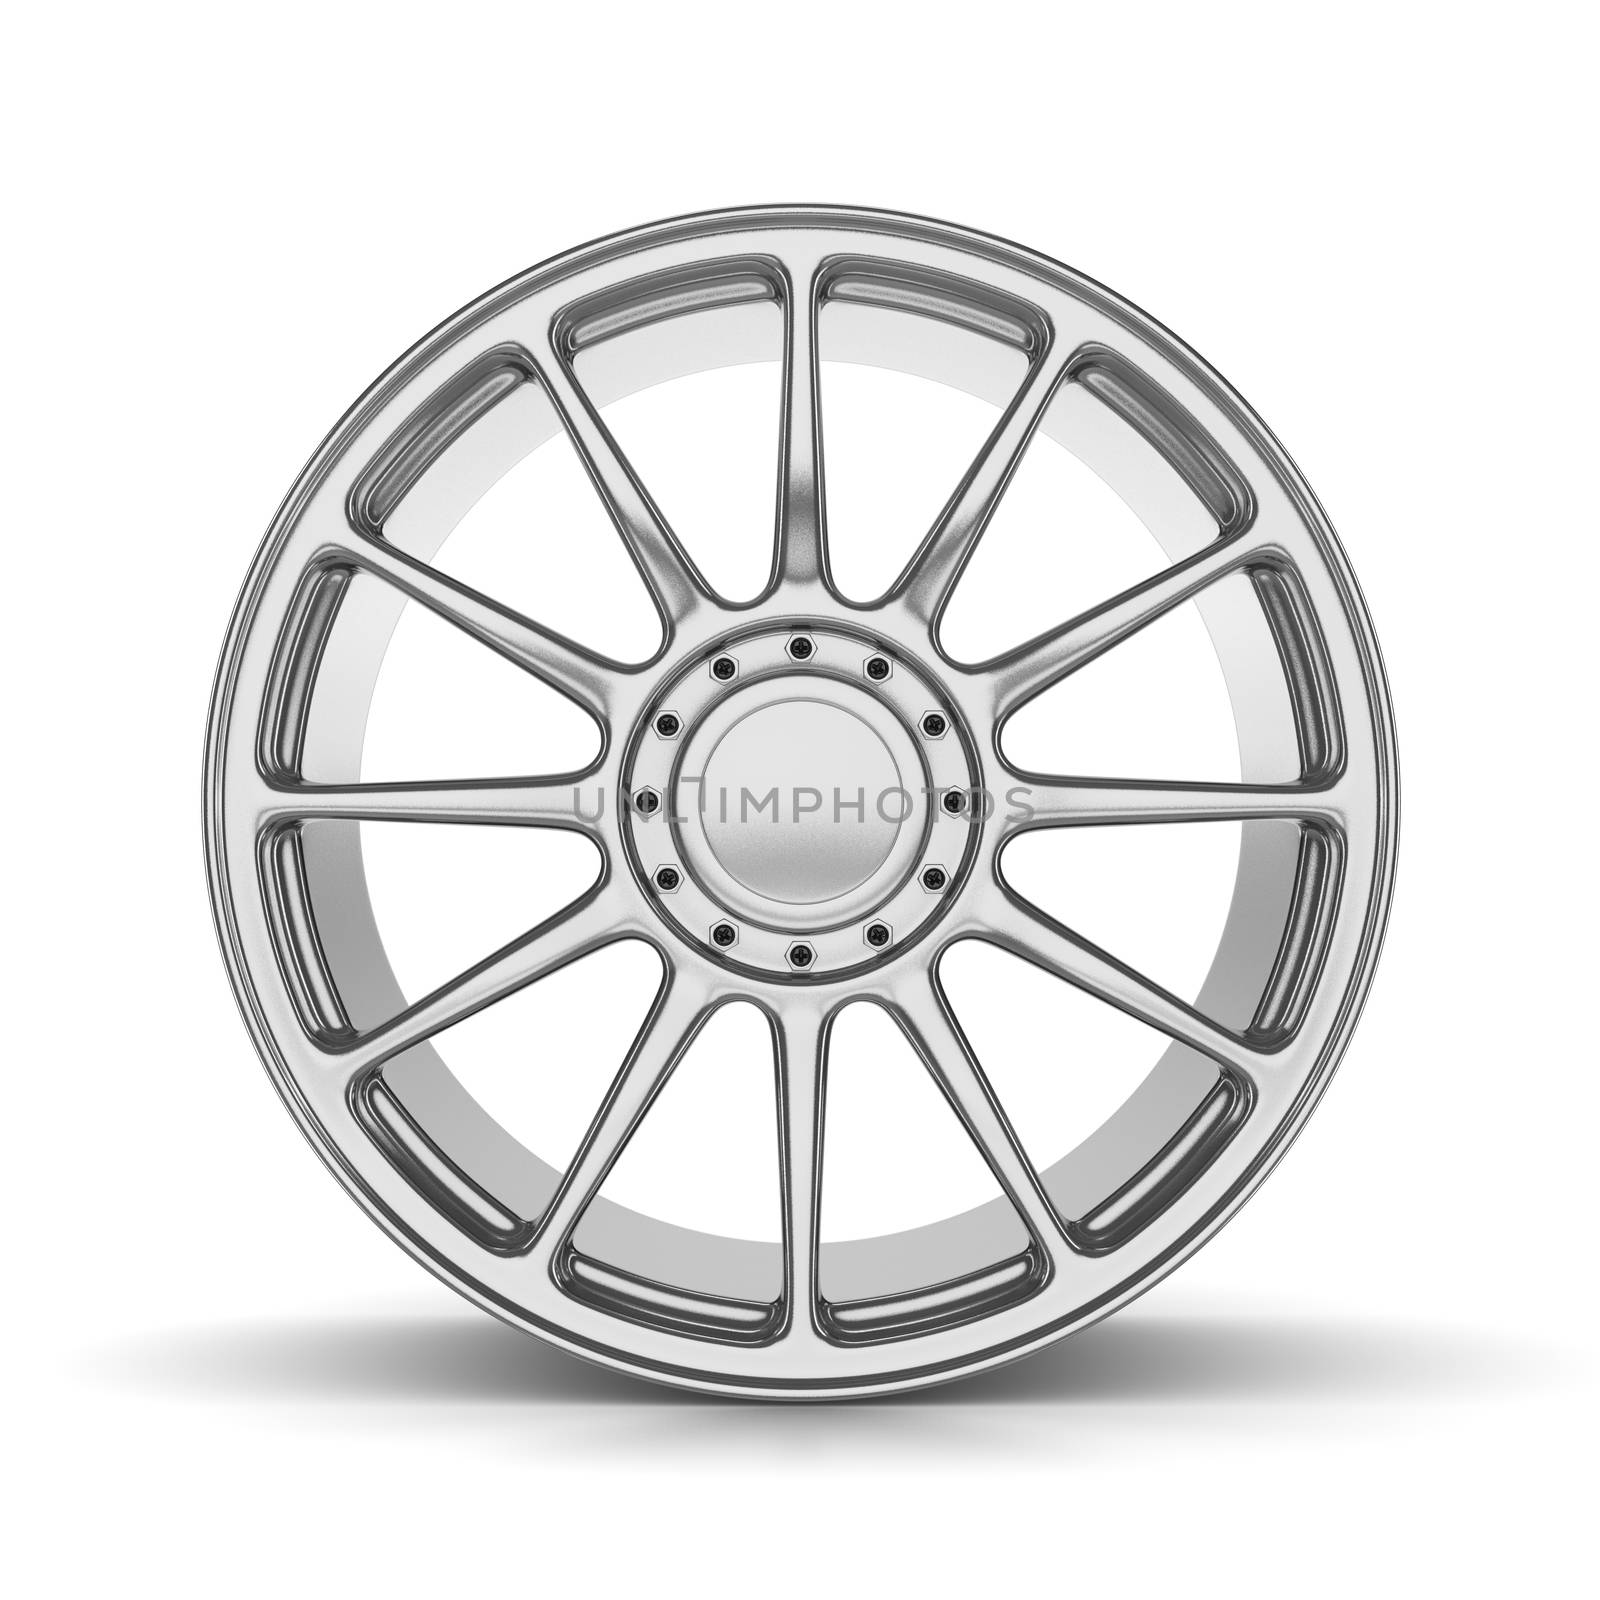 Single Car Rim on White Background Front View